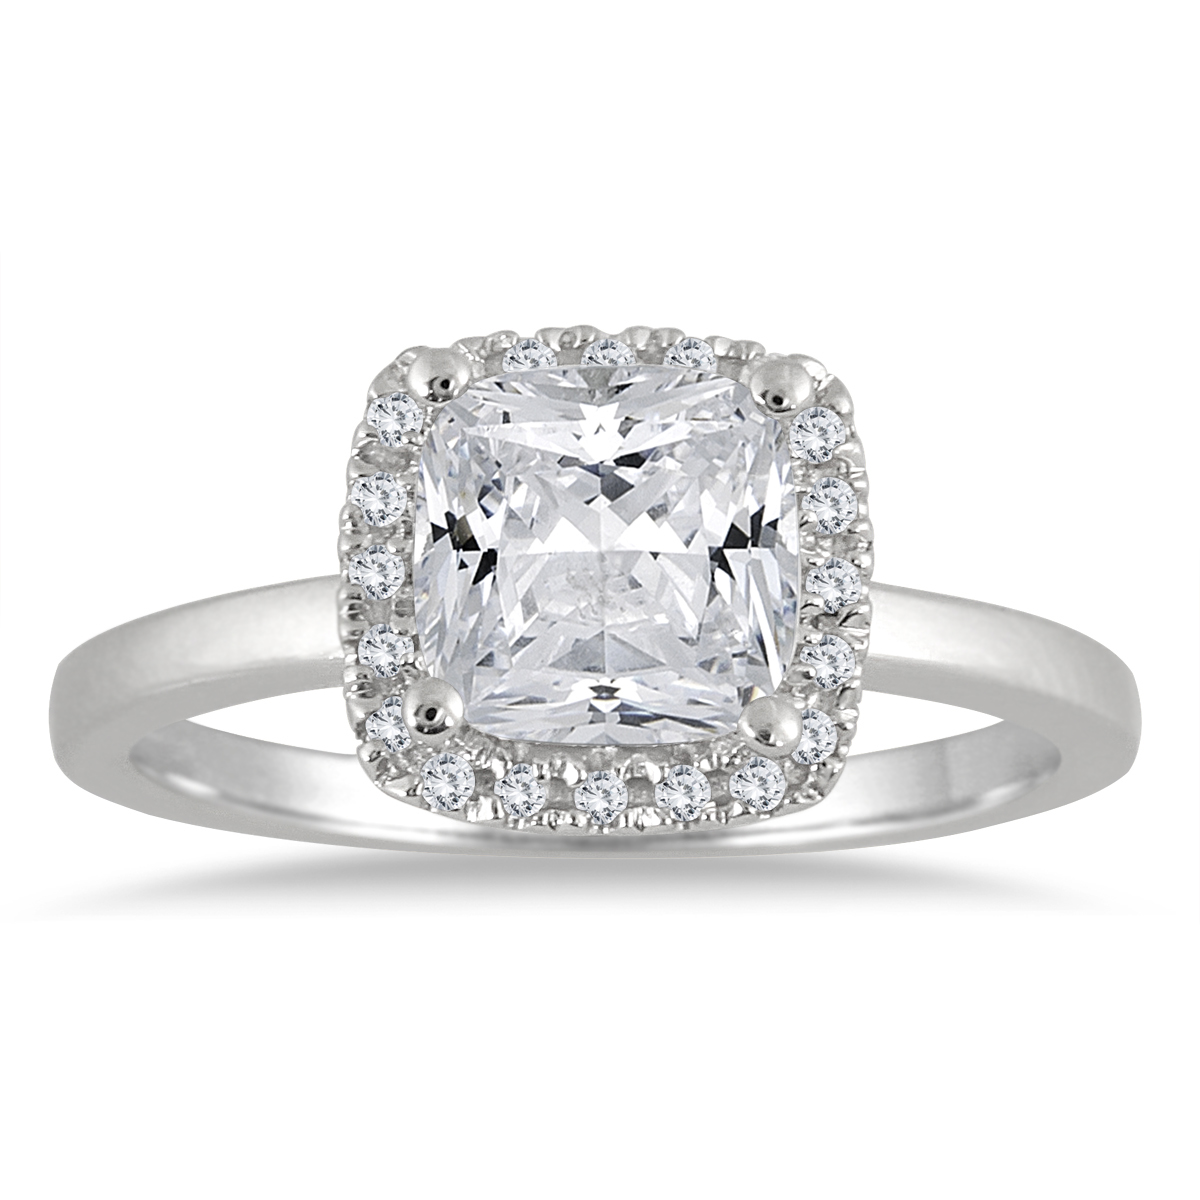 Image of AGS Certified 1 1/6 Carat TW Cushion Cut Diamond Halo Ring in 14K White Gold